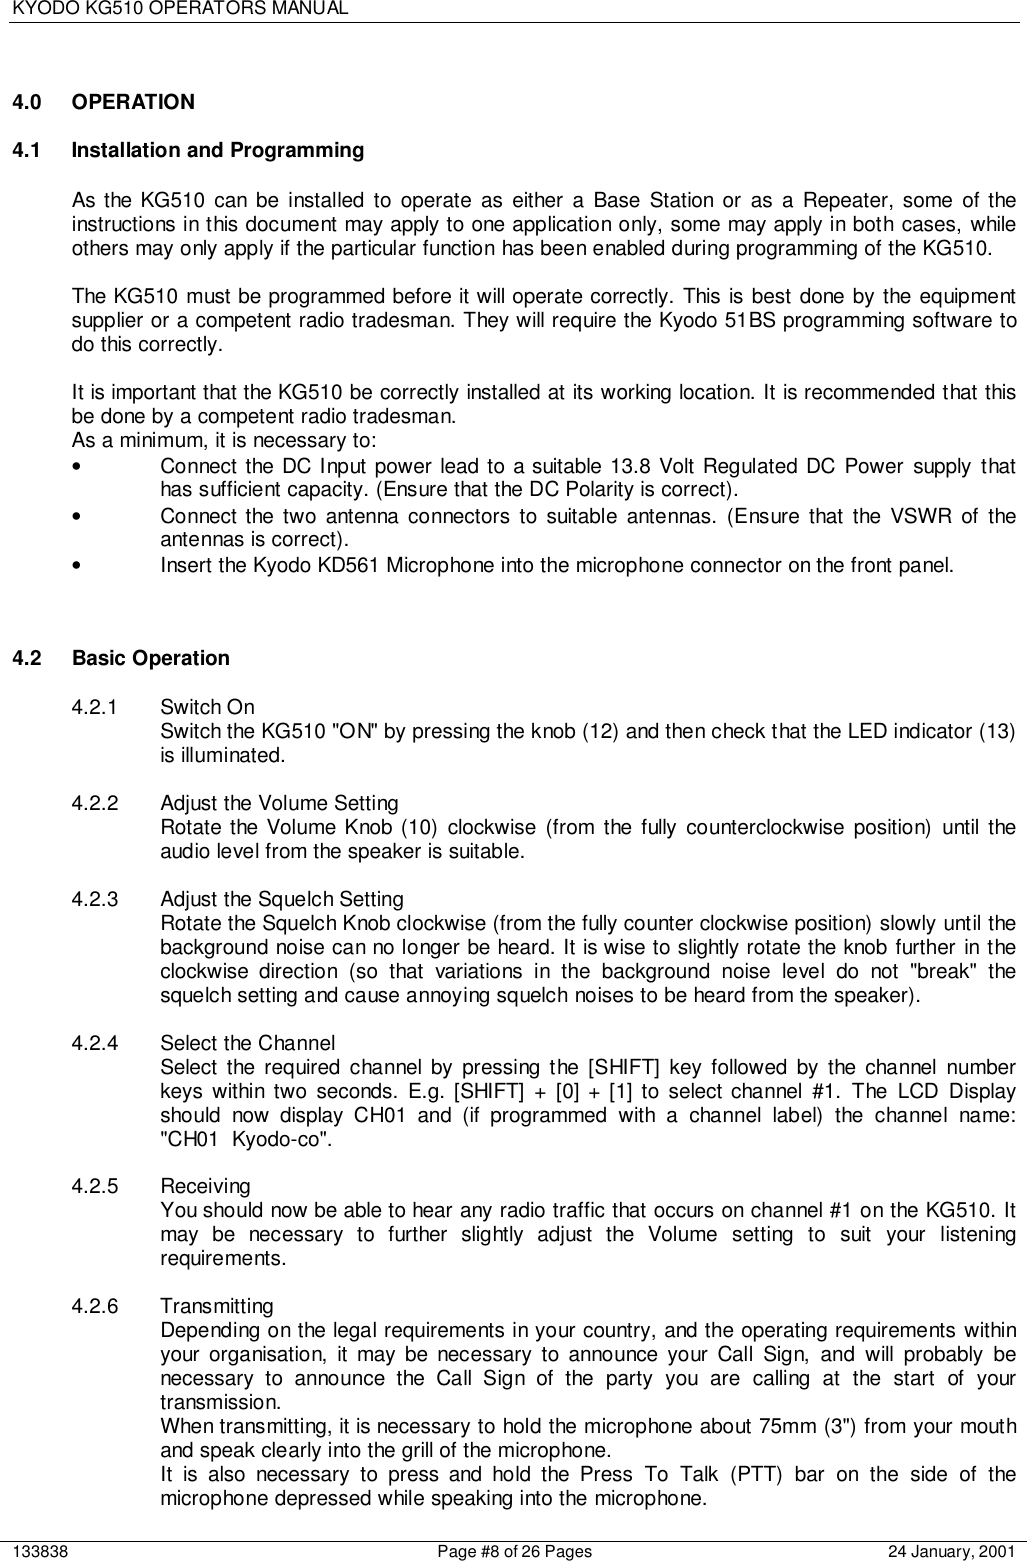 KYODO KG510 OPERATORS MANUAL133838 Page #8 of 26 Pages 24 January, 20014.0 OPERATION4.1  Installation and ProgrammingAs the KG510 can be installed to operate as either a Base Station or as a Repeater, some of theinstructions in this document may apply to one application only, some may apply in both cases, whileothers may only apply if the particular function has been enabled during programming of the KG510.The KG510 must be programmed before it will operate correctly. This is best done by the equipmentsupplier or a competent radio tradesman. They will require the Kyodo 51BS programming software todo this correctly.It is important that the KG510 be correctly installed at its working location. It is recommended that thisbe done by a competent radio tradesman.As a minimum, it is necessary to:•  Connect the DC Input power lead to a suitable 13.8 Volt Regulated DC Power supply thathas sufficient capacity. (Ensure that the DC Polarity is correct).•  Connect the two antenna connectors to suitable antennas. (Ensure that the VSWR of theantennas is correct).•  Insert the Kyodo KD561 Microphone into the microphone connector on the front panel.4.2 Basic Operation4.2.1 Switch OnSwitch the KG510 &quot;ON&quot; by pressing the knob (12) and then check that the LED indicator (13)is illuminated.4.2.2  Adjust the Volume SettingRotate the Volume Knob (10) clockwise (from the fully counterclockwise position) until theaudio level from the speaker is suitable.4.2.3 Adjust the Squelch SettingRotate the Squelch Knob clockwise (from the fully counter clockwise position) slowly until thebackground noise can no longer be heard. It is wise to slightly rotate the knob further in theclockwise direction (so that variations in the background noise level do not &quot;break&quot; thesquelch setting and cause annoying squelch noises to be heard from the speaker).4.2.4 Select the ChannelSelect the required channel by pressing the [SHIFT] key followed by the channel numberkeys within two seconds. E.g. [SHIFT] + [0] + [1] to select channel #1. The LCD Displayshould now display CH01 and (if programmed with a channel label) the channel name:&quot;CH01  Kyodo-co&quot;.4.2.5 ReceivingYou should now be able to hear any radio traffic that occurs on channel #1 on the KG510. Itmay be necessary to further slightly adjust the Volume setting to suit your listeningrequirements.4.2.6 TransmittingDepending on the legal requirements in your country, and the operating requirements withinyour organisation, it may be necessary to announce your Call Sign, and will probably benecessary to announce the Call Sign of the party you are calling at the start of yourtransmission.When transmitting, it is necessary to hold the microphone about 75mm (3&quot;) from your mouthand speak clearly into the grill of the microphone.It is also necessary to press and hold the Press To Talk (PTT) bar on the side of themicrophone depressed while speaking into the microphone.